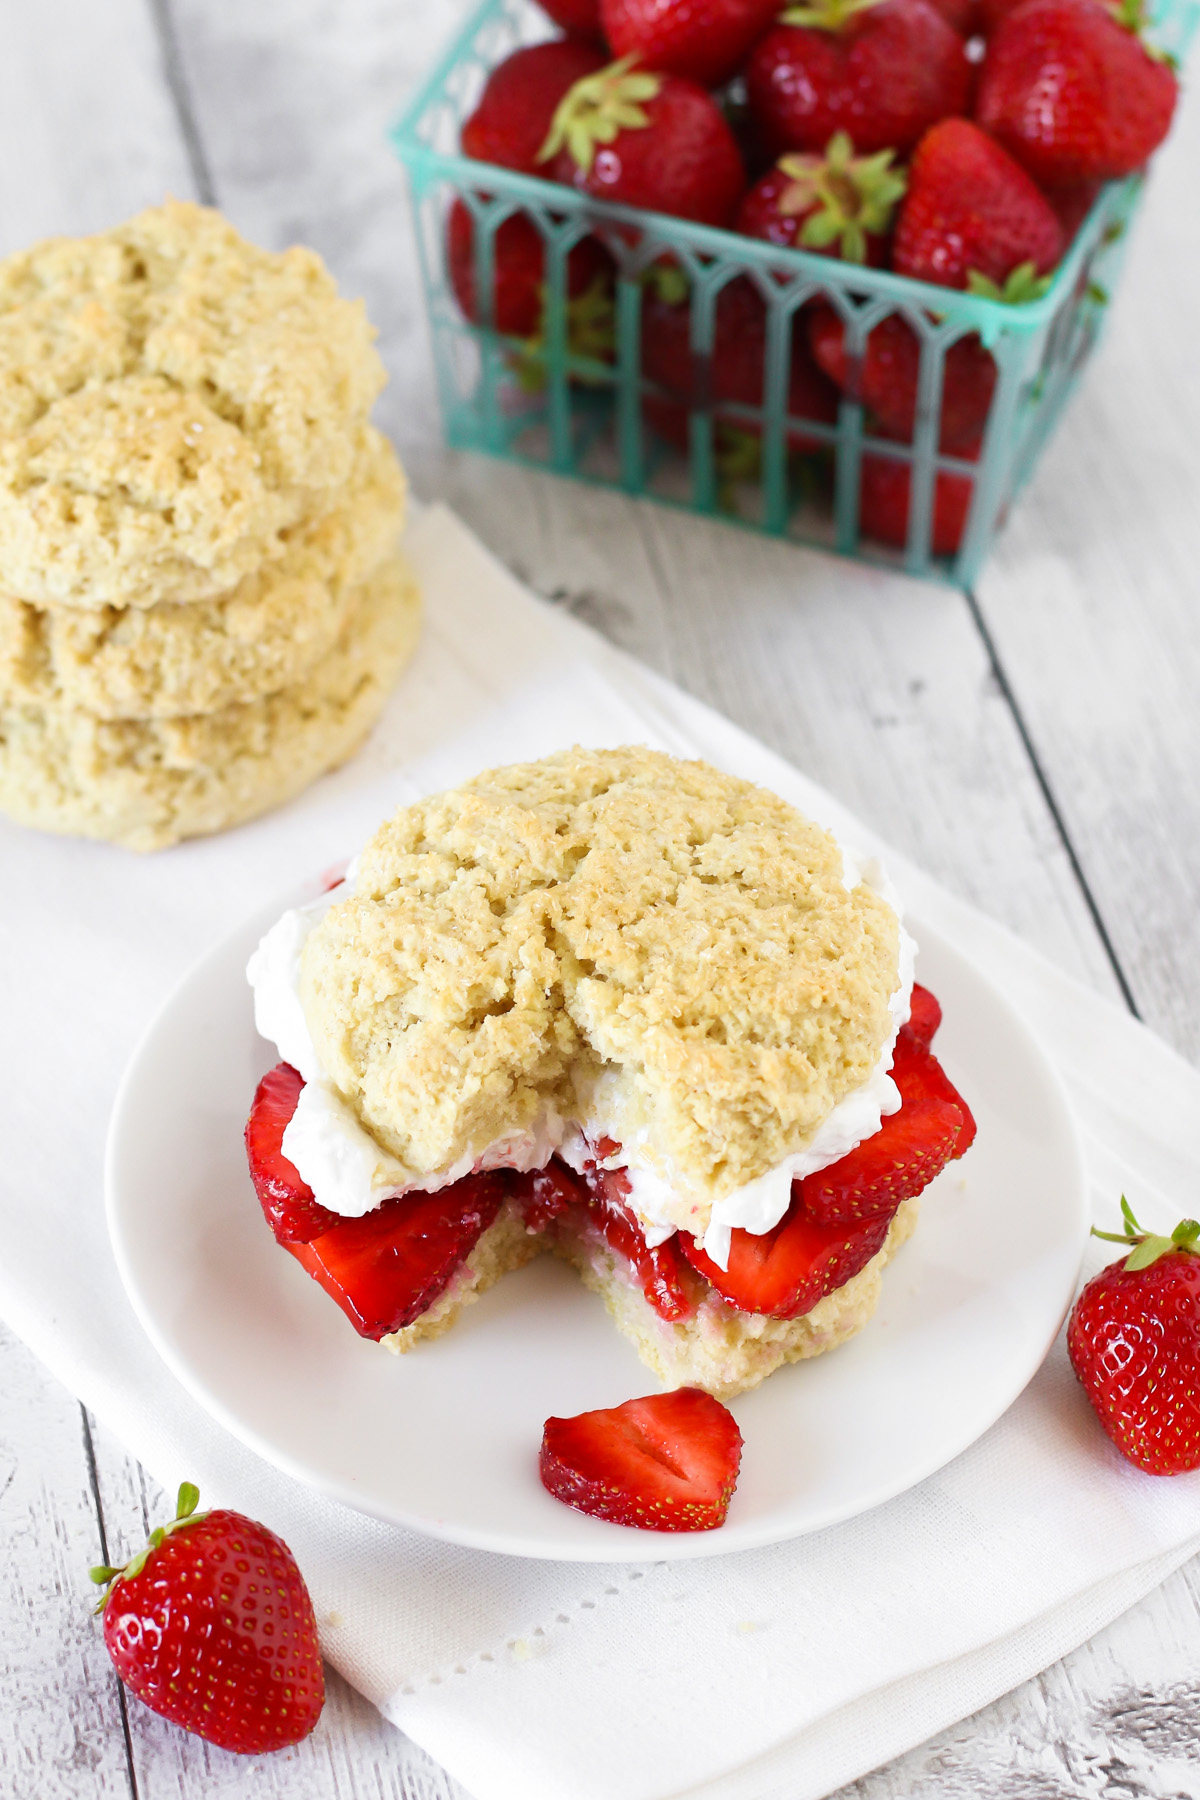 Gluten Free Vegan Classic Strawberry Shortcake. Soft, sweet biscuits, filled with fresh strawberries and whipped coconut cream.